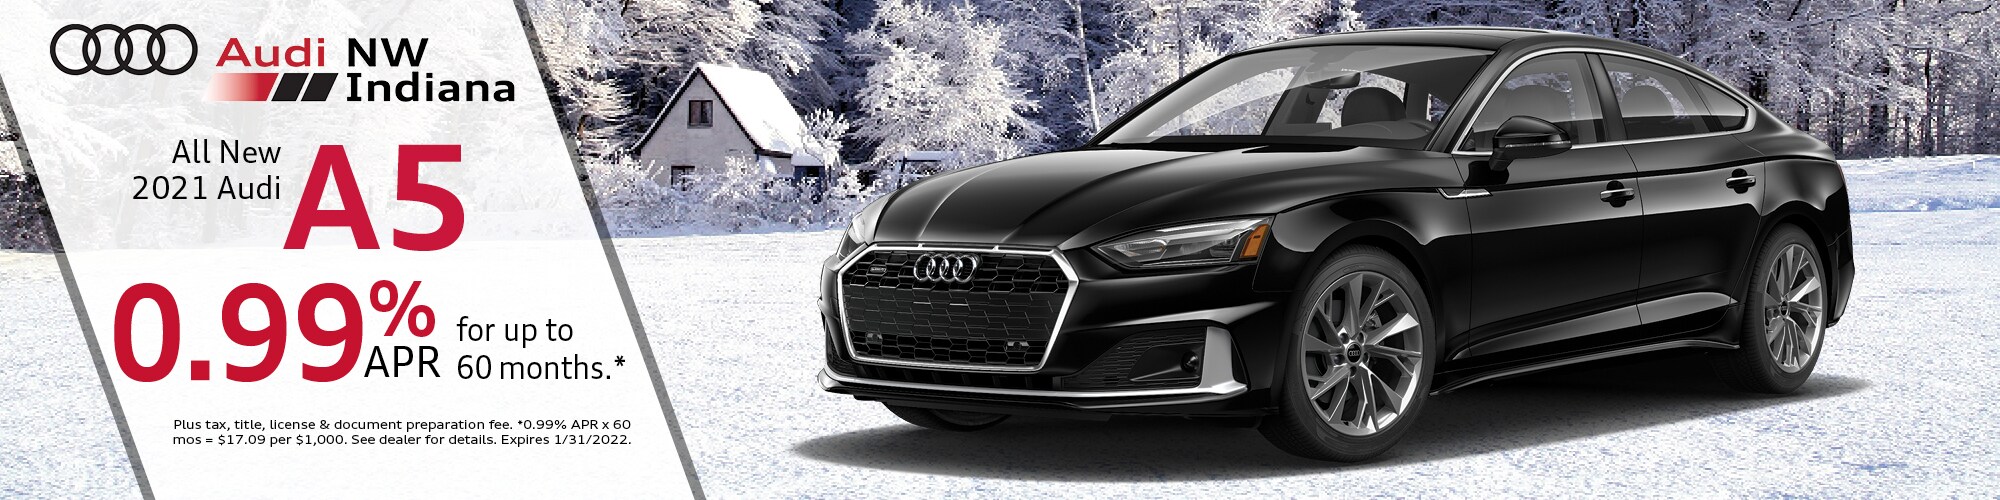 Get the all new 2021 Audi A5 with 0.99% APR for up to 60 months.>
<div class=